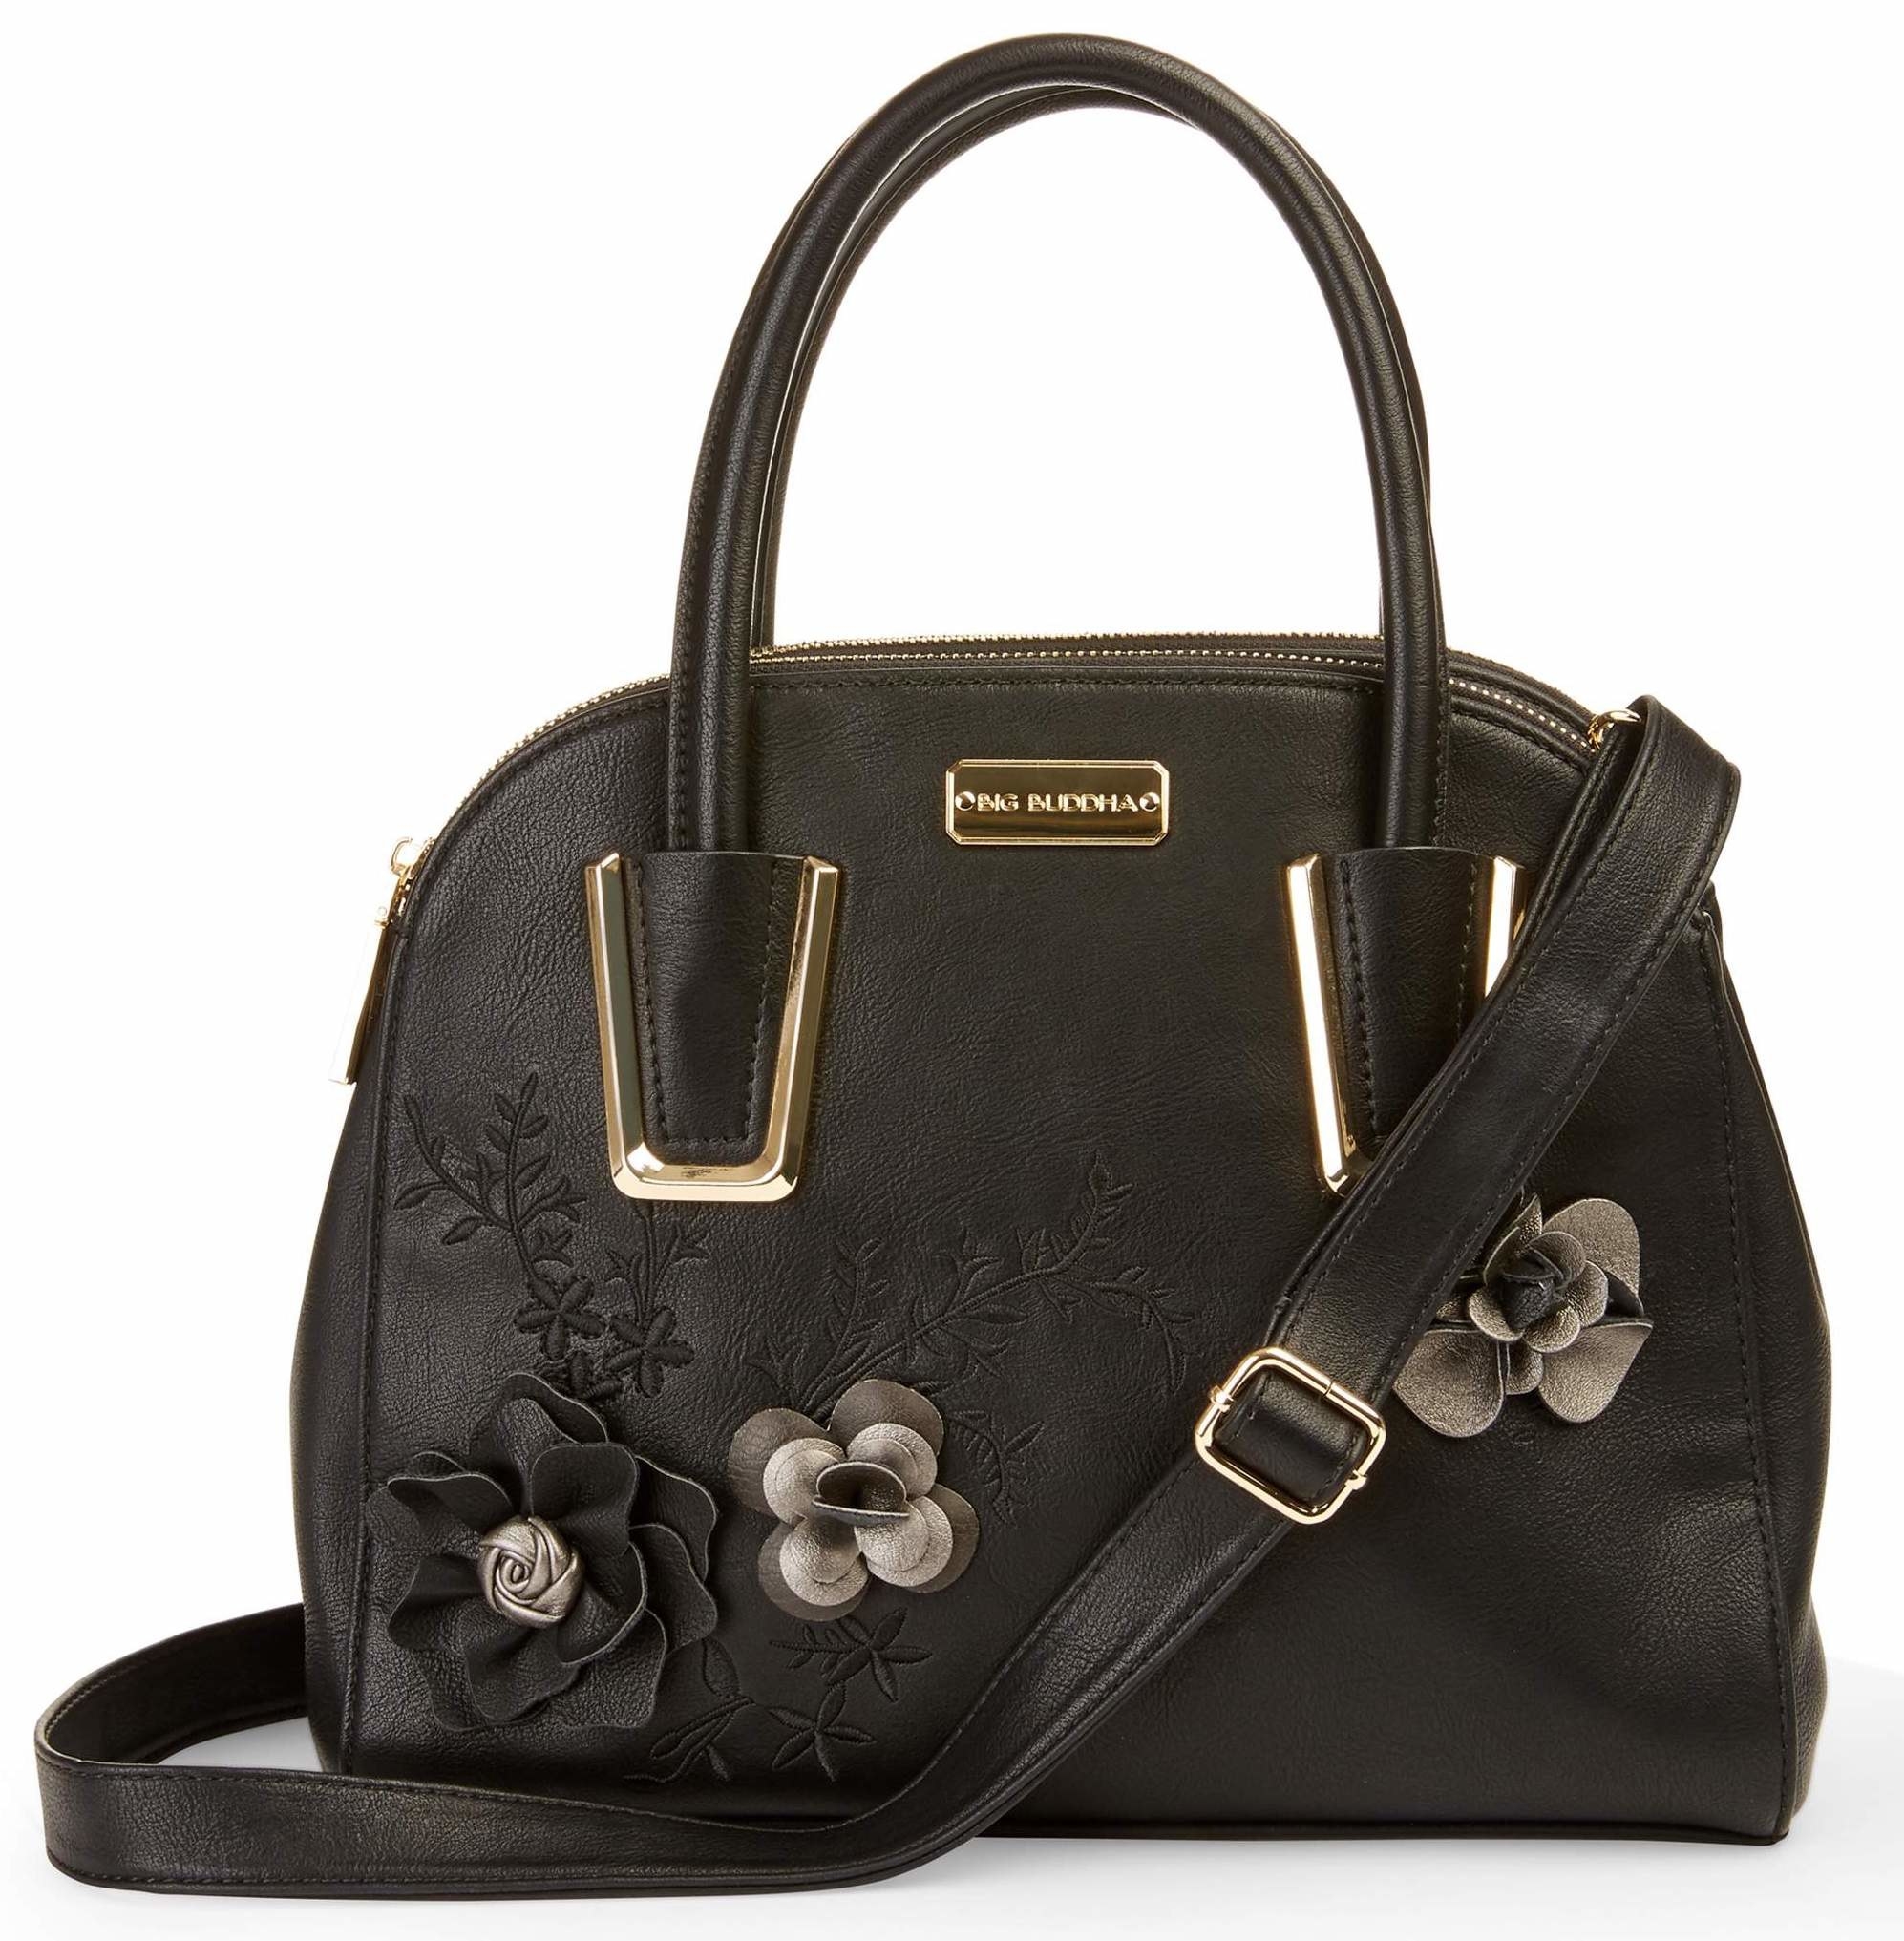 Kate Spade purse sale: Get an extra 30% off purses and shoes for fall